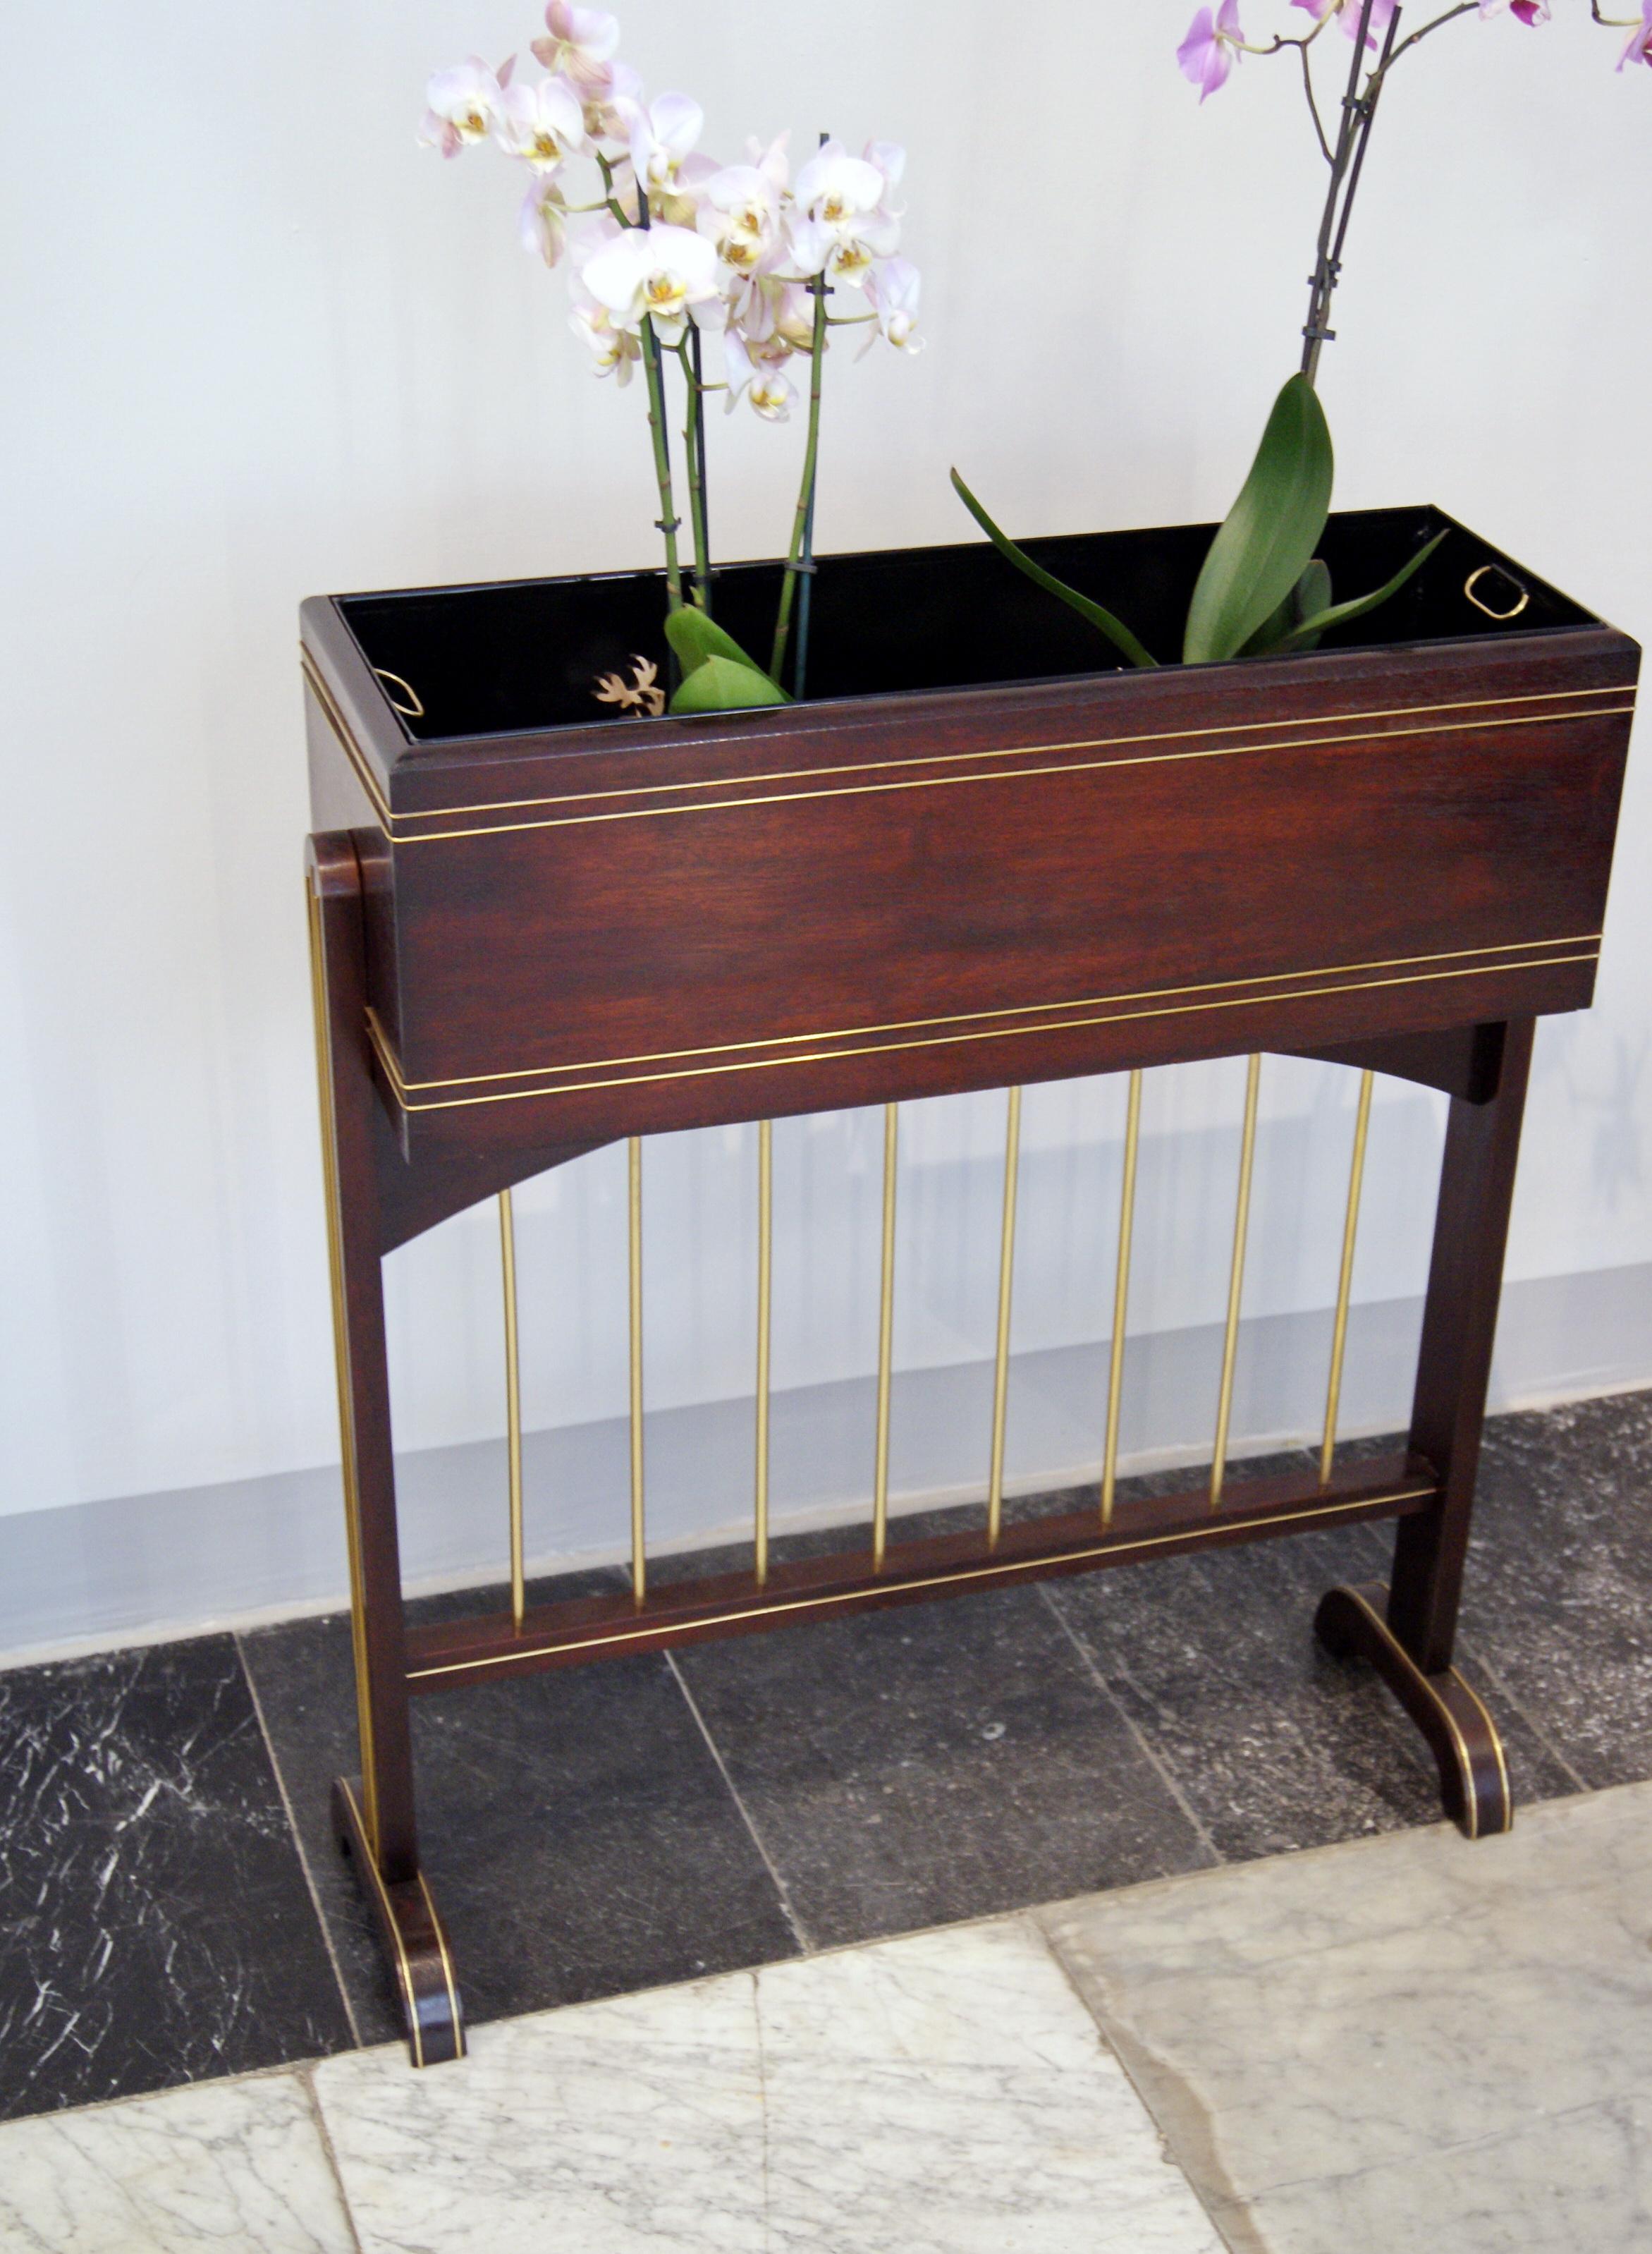 Austrian Art Nouveau Flower Container Mahogany Stained Brass Inlays Vienna, circa 1915 For Sale